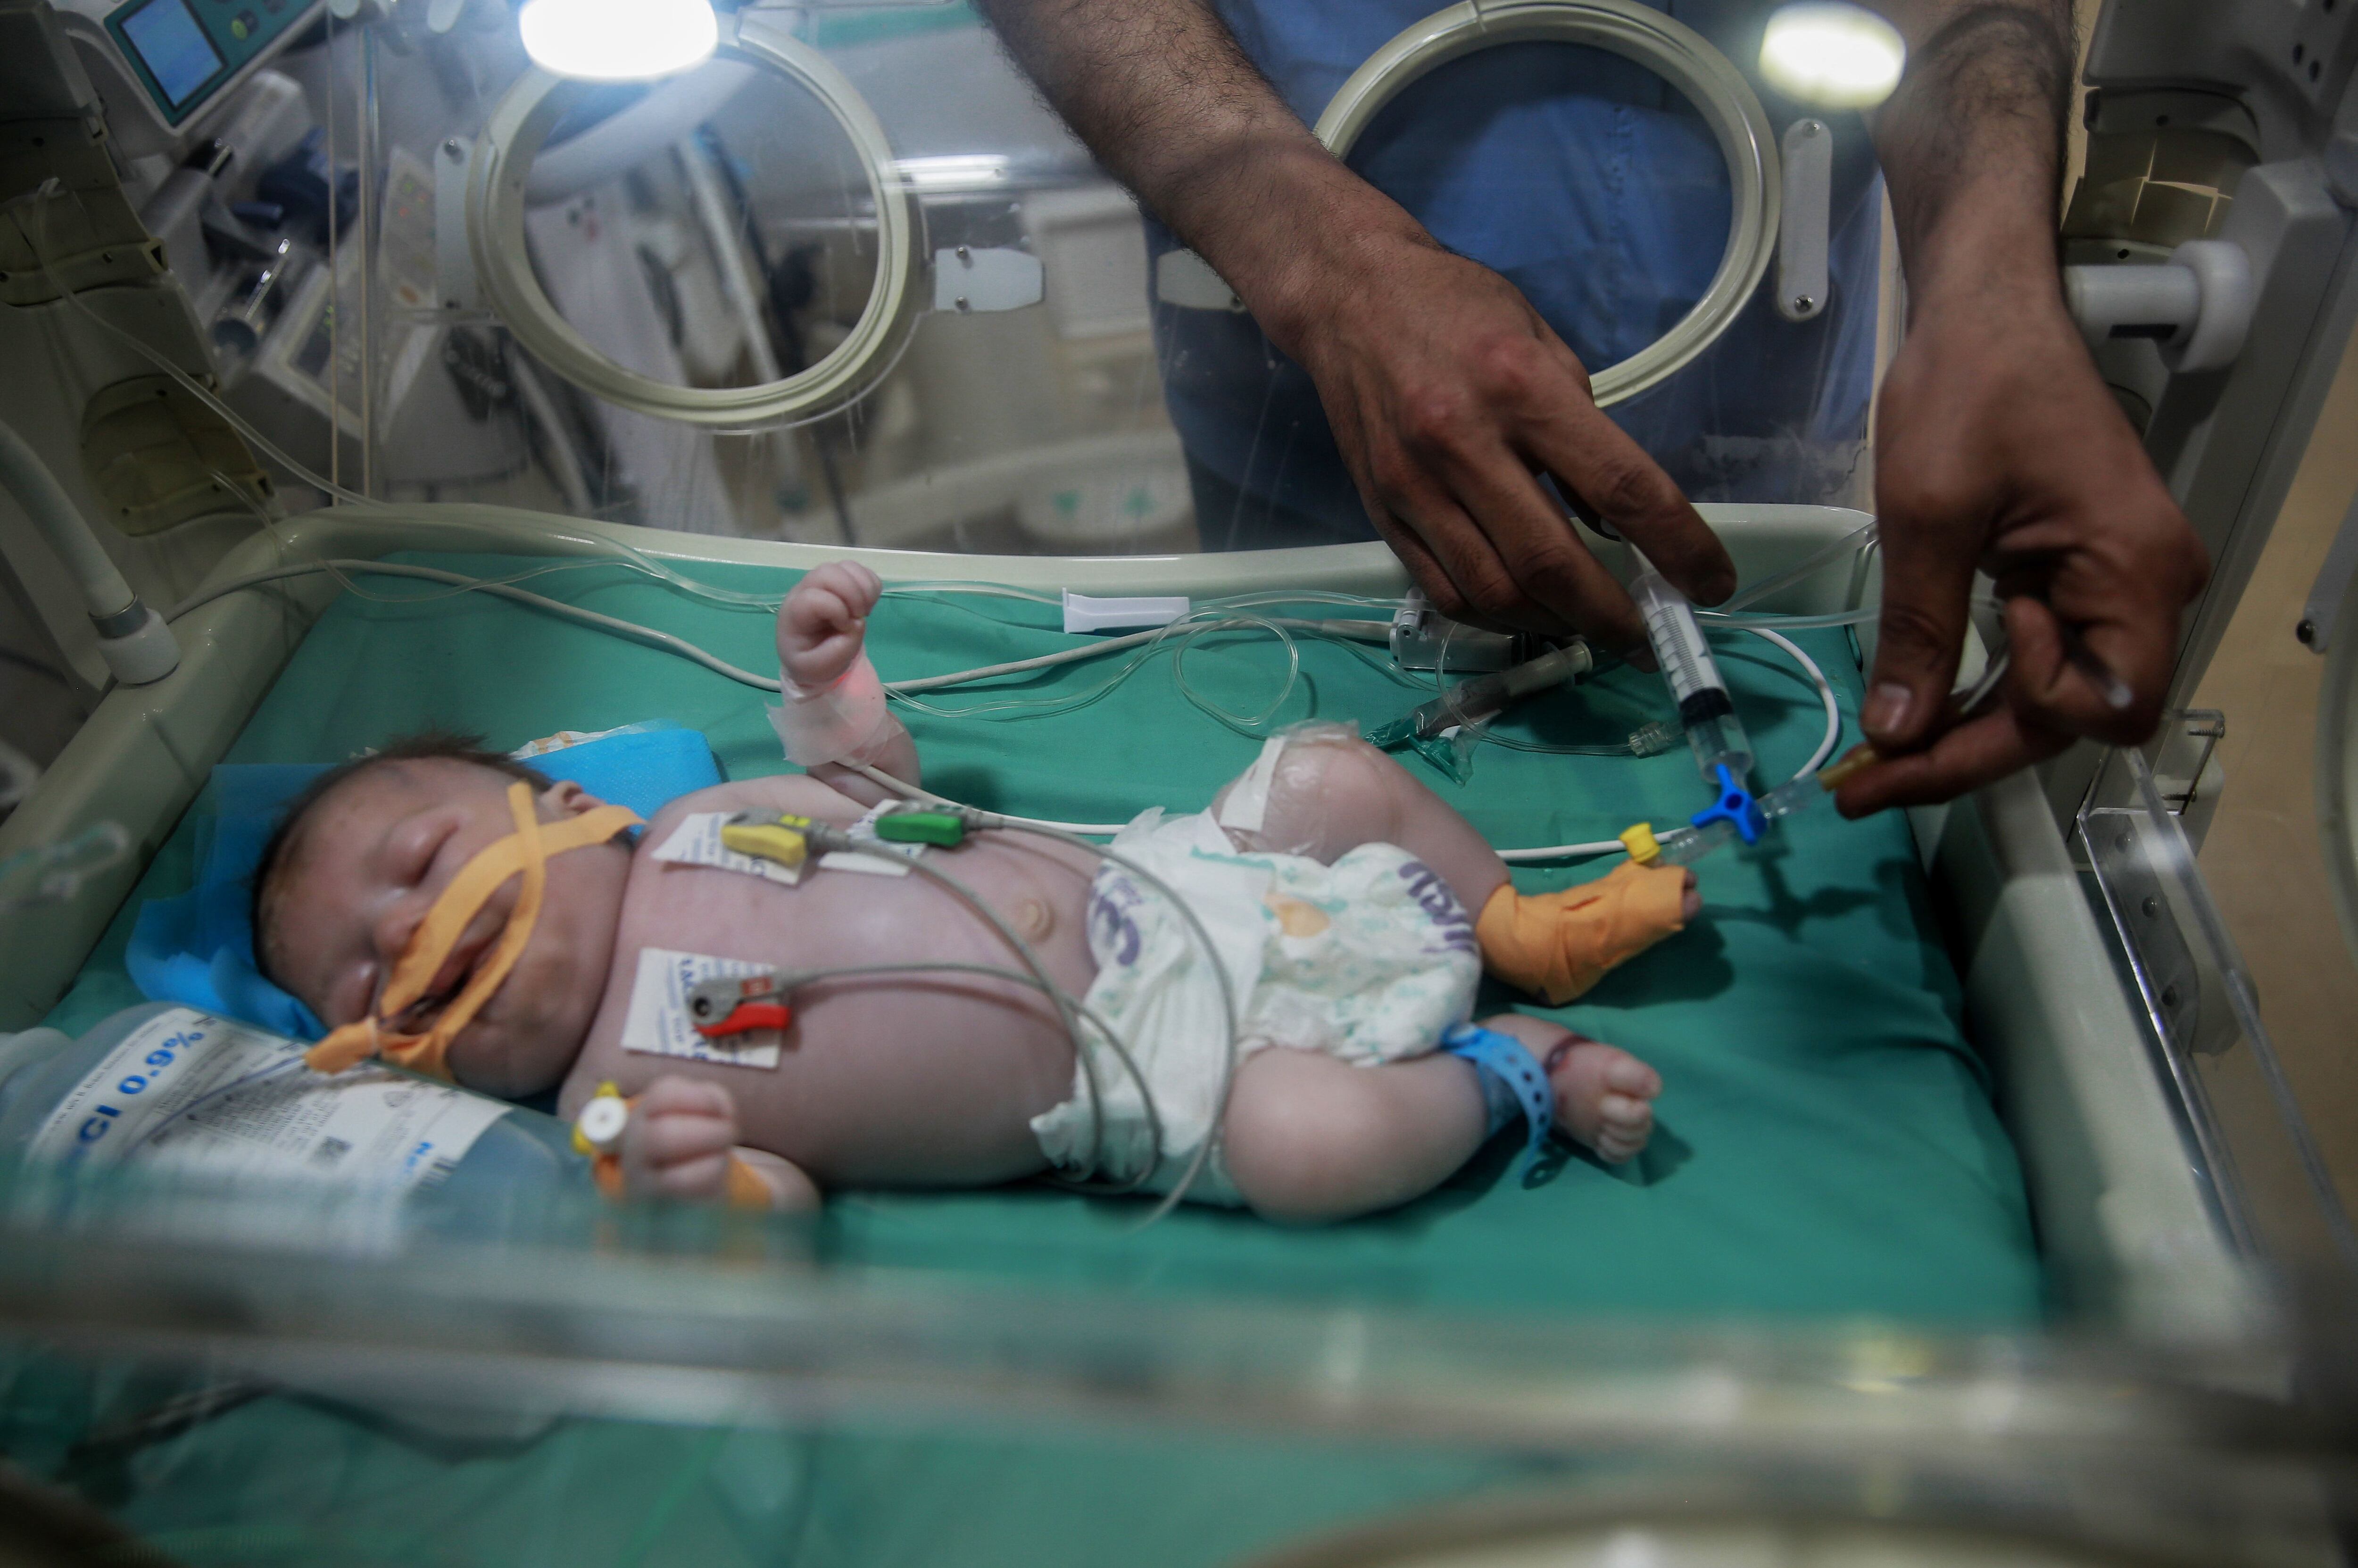 A baby is looked after at the neonatal unit at Kamal Adhwan hospital in Beit Lahia in the Gaza Strip, where children are born with complications due to malnourished mothers.